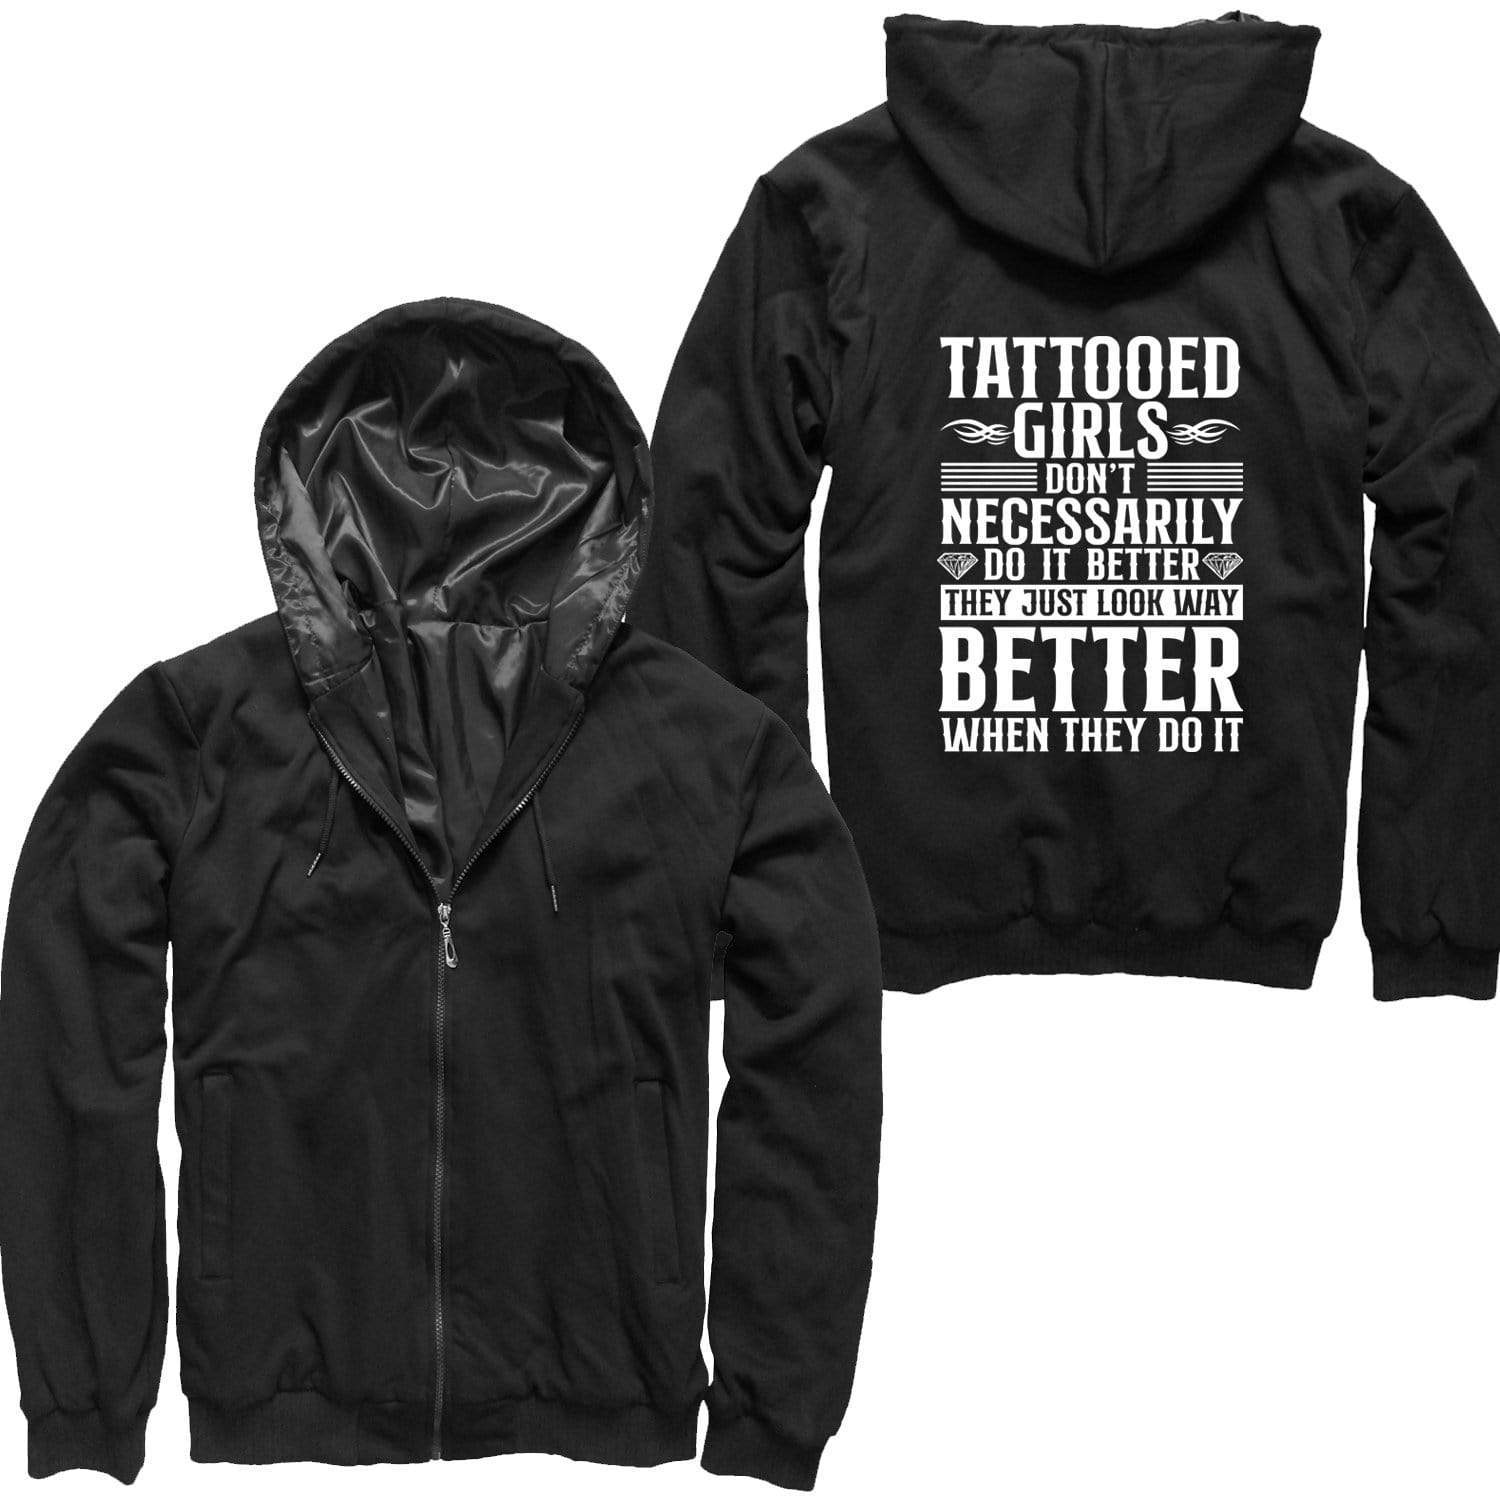 Tattooed Girls Don't Necessarily Do It Better Spring Jacket - The Gear Stand